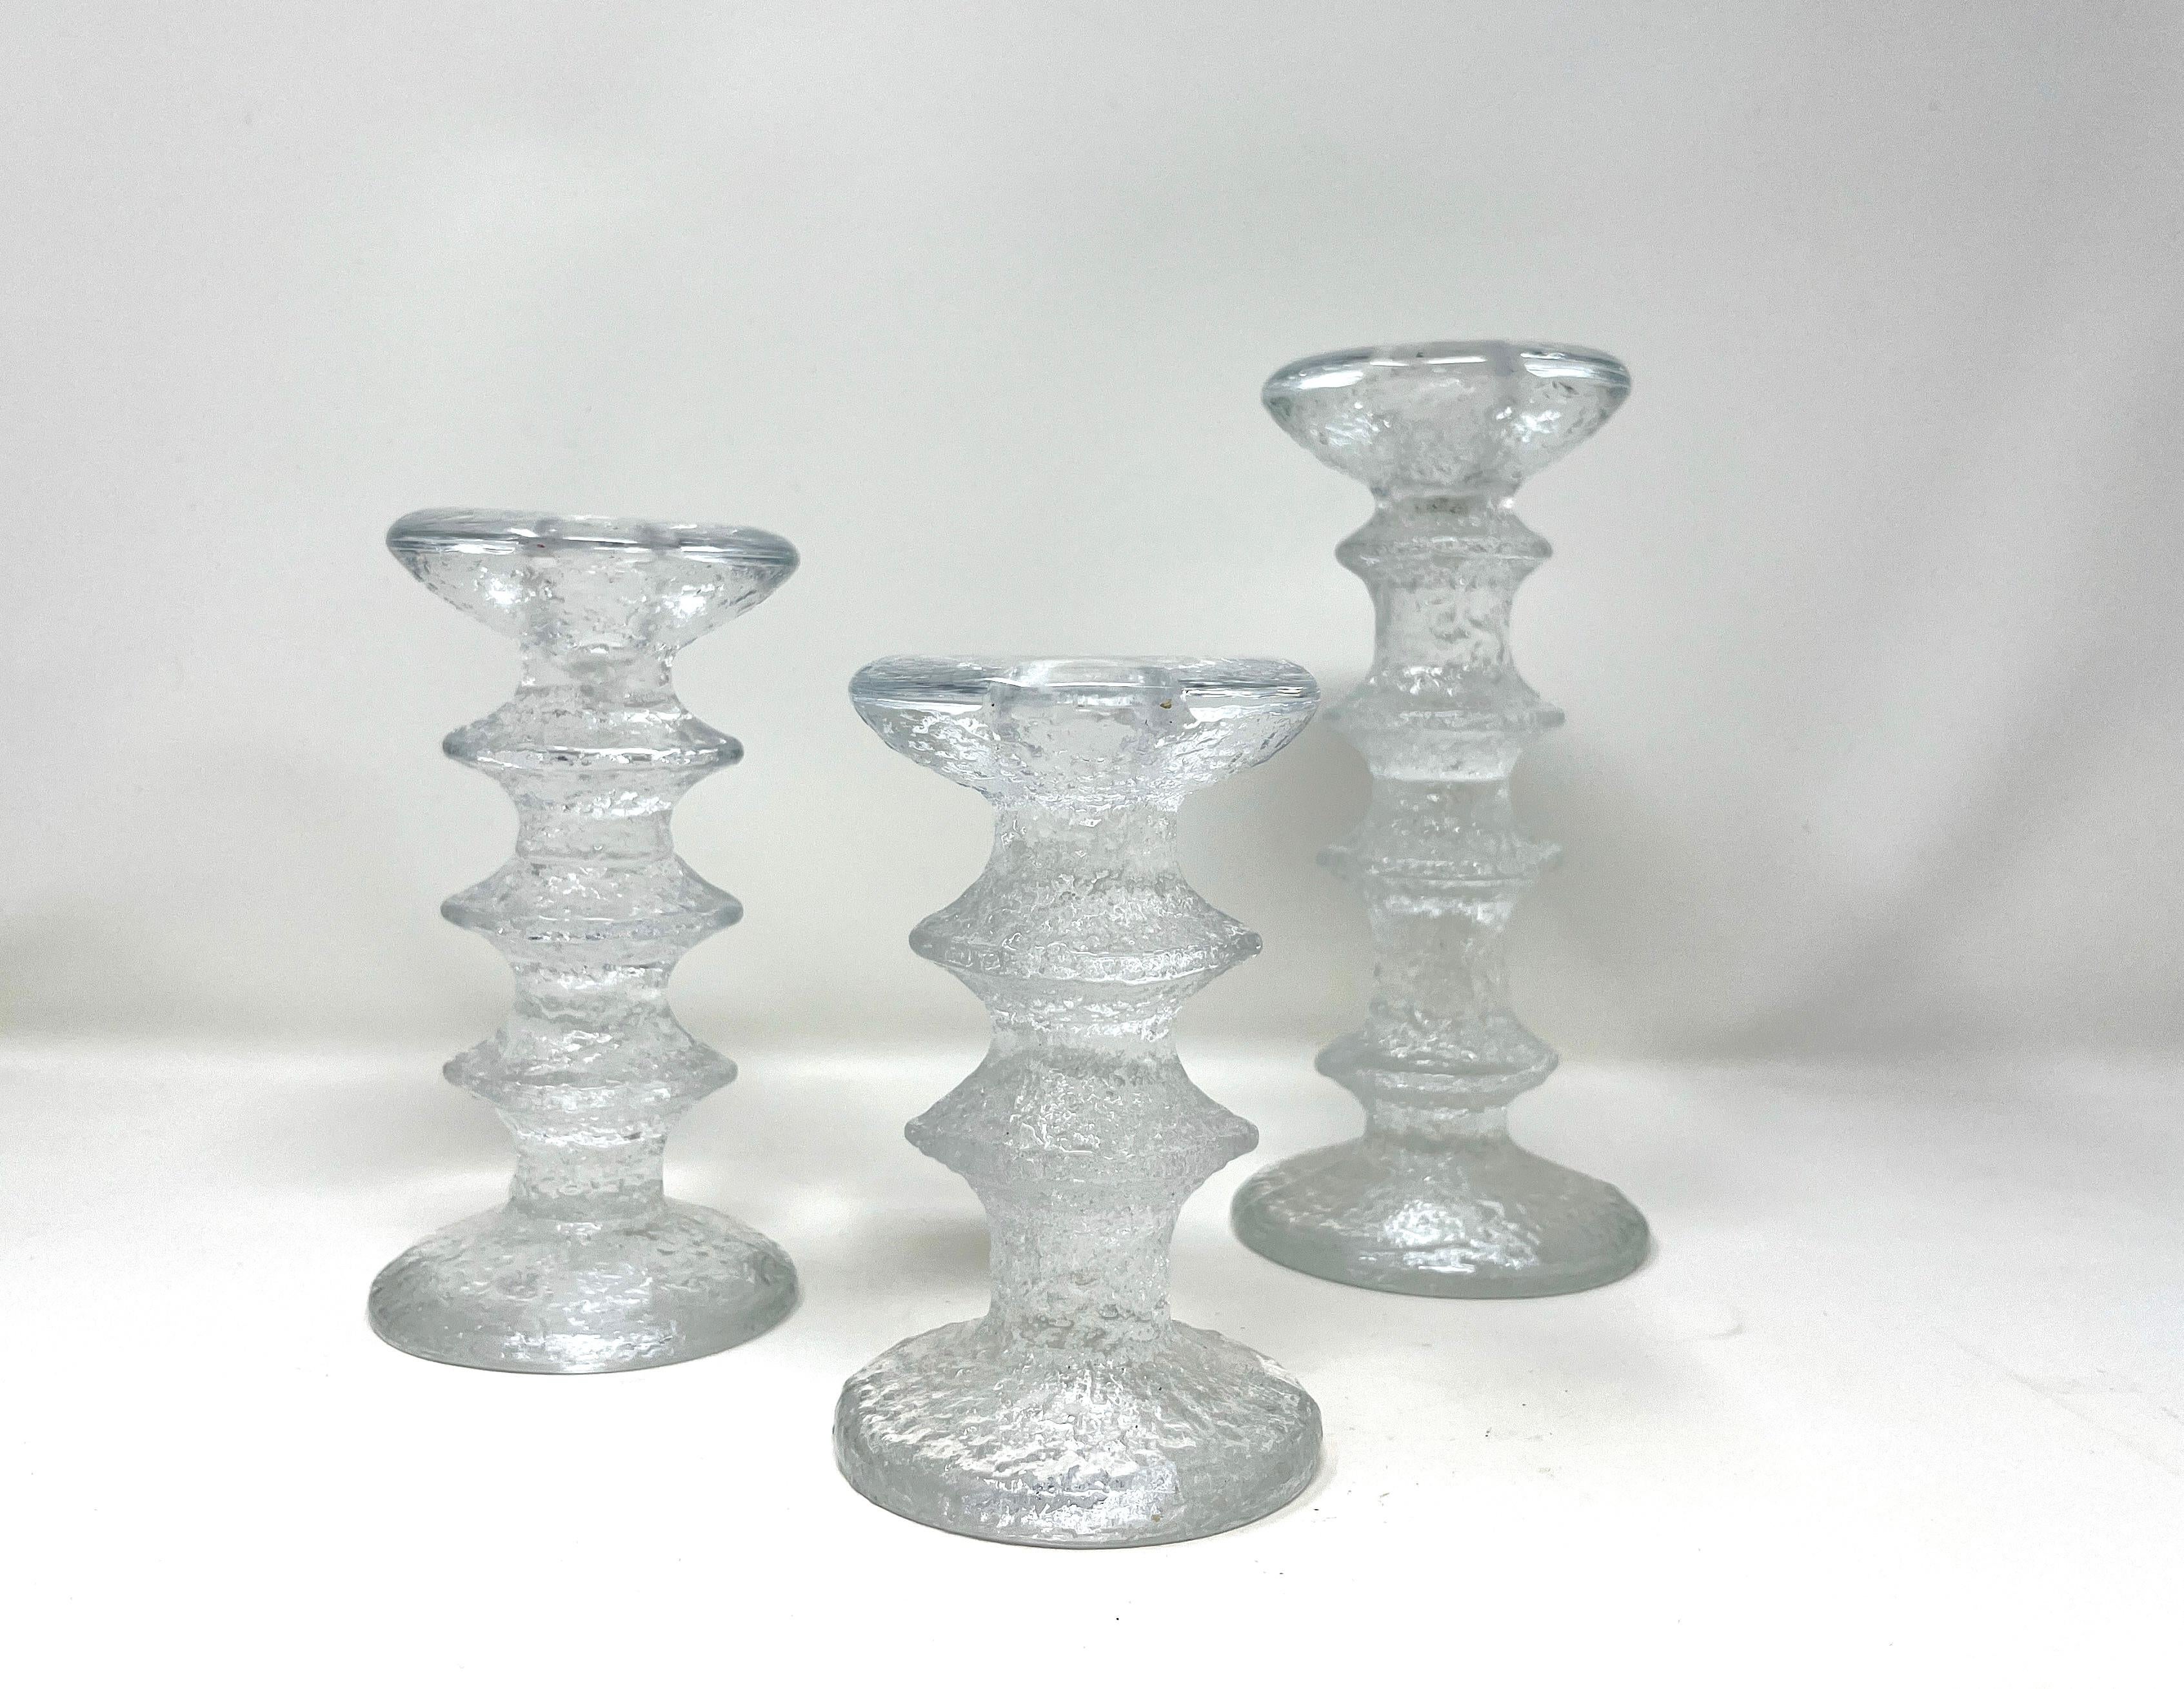 Set of 3 staggered in size Iittala candlesticks. Textured clear molded glass composed as a column with projecting bands, a flared mouth and a round base. Designed by Timo Sarpaneva for Iittala, Finland. A beautiful, classic Scandinavian Modern